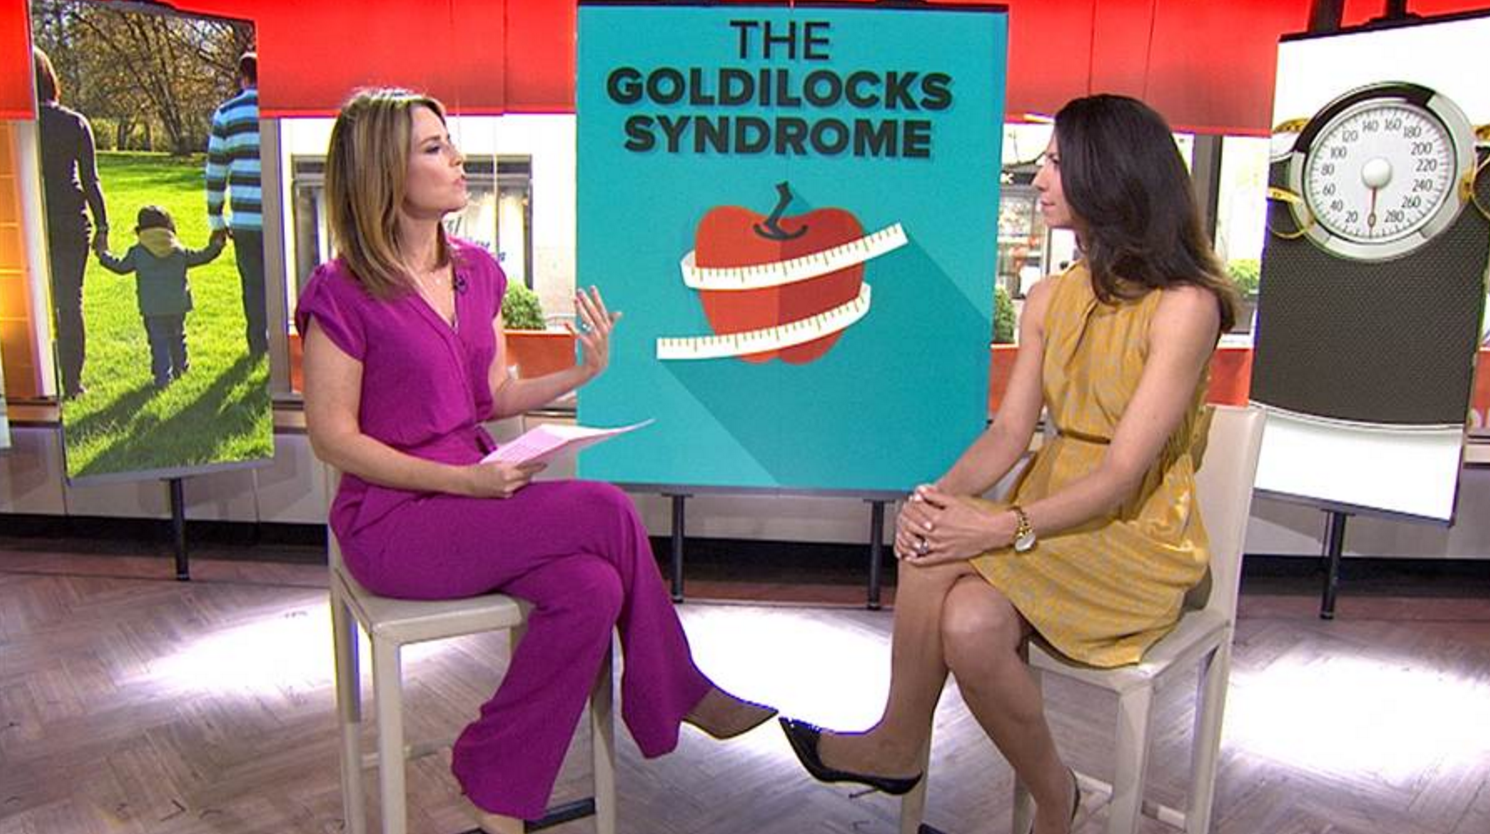 Goldilocks syndrome: Why Parents Often Don’t View Their Kids as Overweight - The truth is, one-third of children in this country are overweight, which is making it difficult for parents to judge their appearance based on that of their peers'. In fact, according to the Washington Post, a recent study shows that about 95 percent of parents cannot tell if their kid is overweight. That means you are definitely not alone. Click on the image to view more information about the "Goldilocks syndrome" and hear Dr. Duncan go more in-depth in this great interview conducted by the Today Show's Savannah Guthrie.